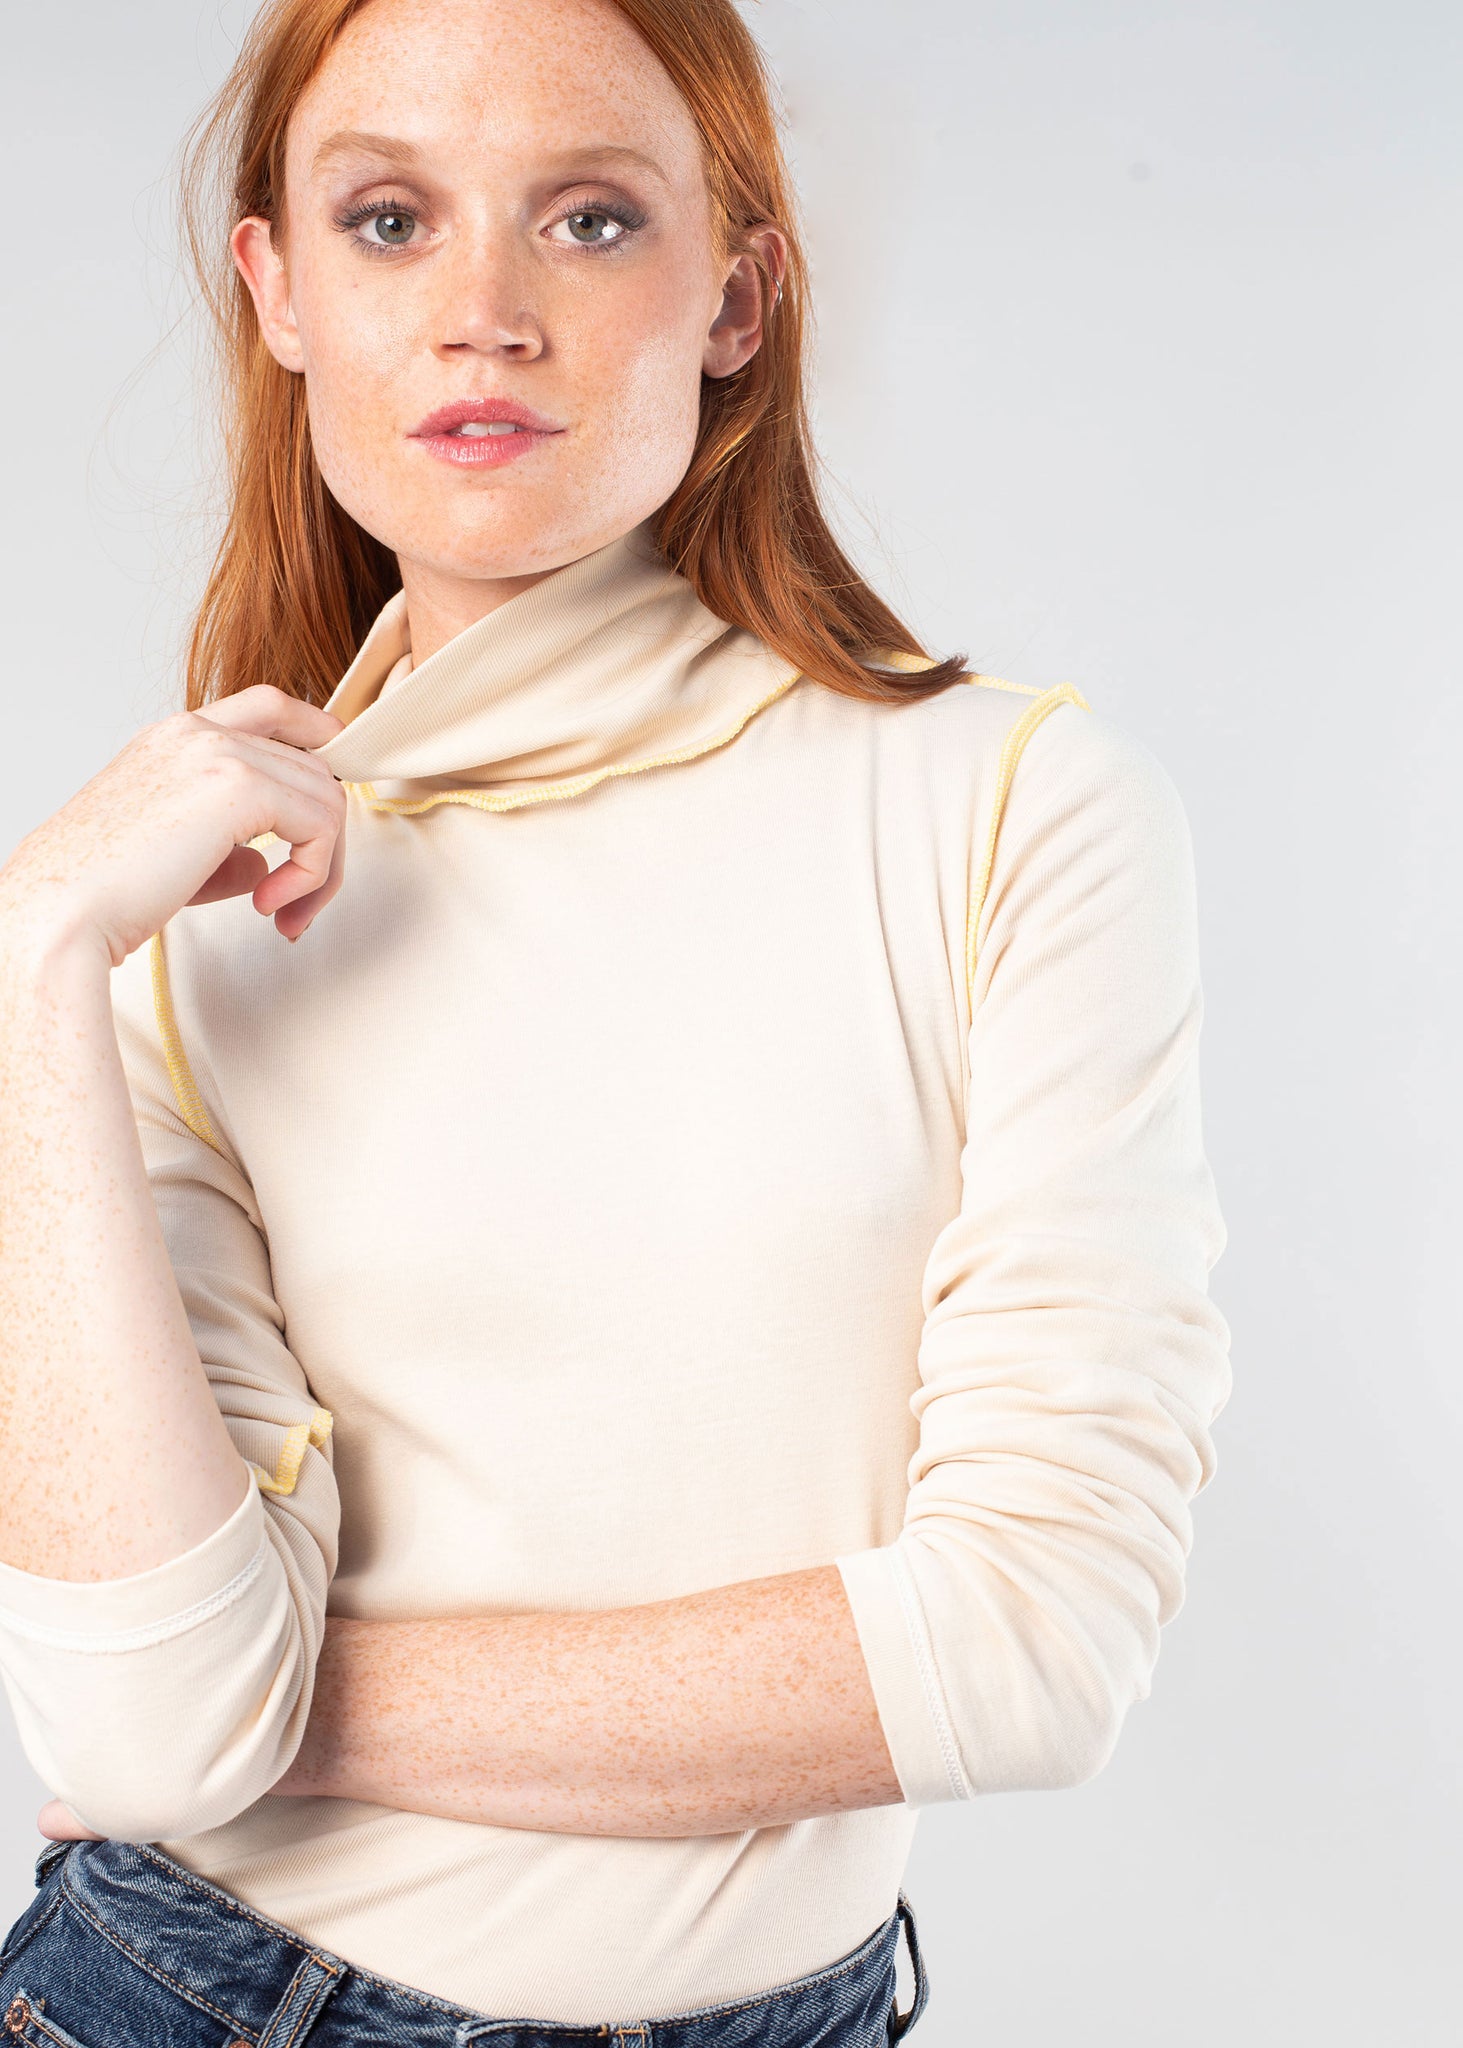 A woman with red hear wearing the undyed turtleneck inside out with pop color stitching